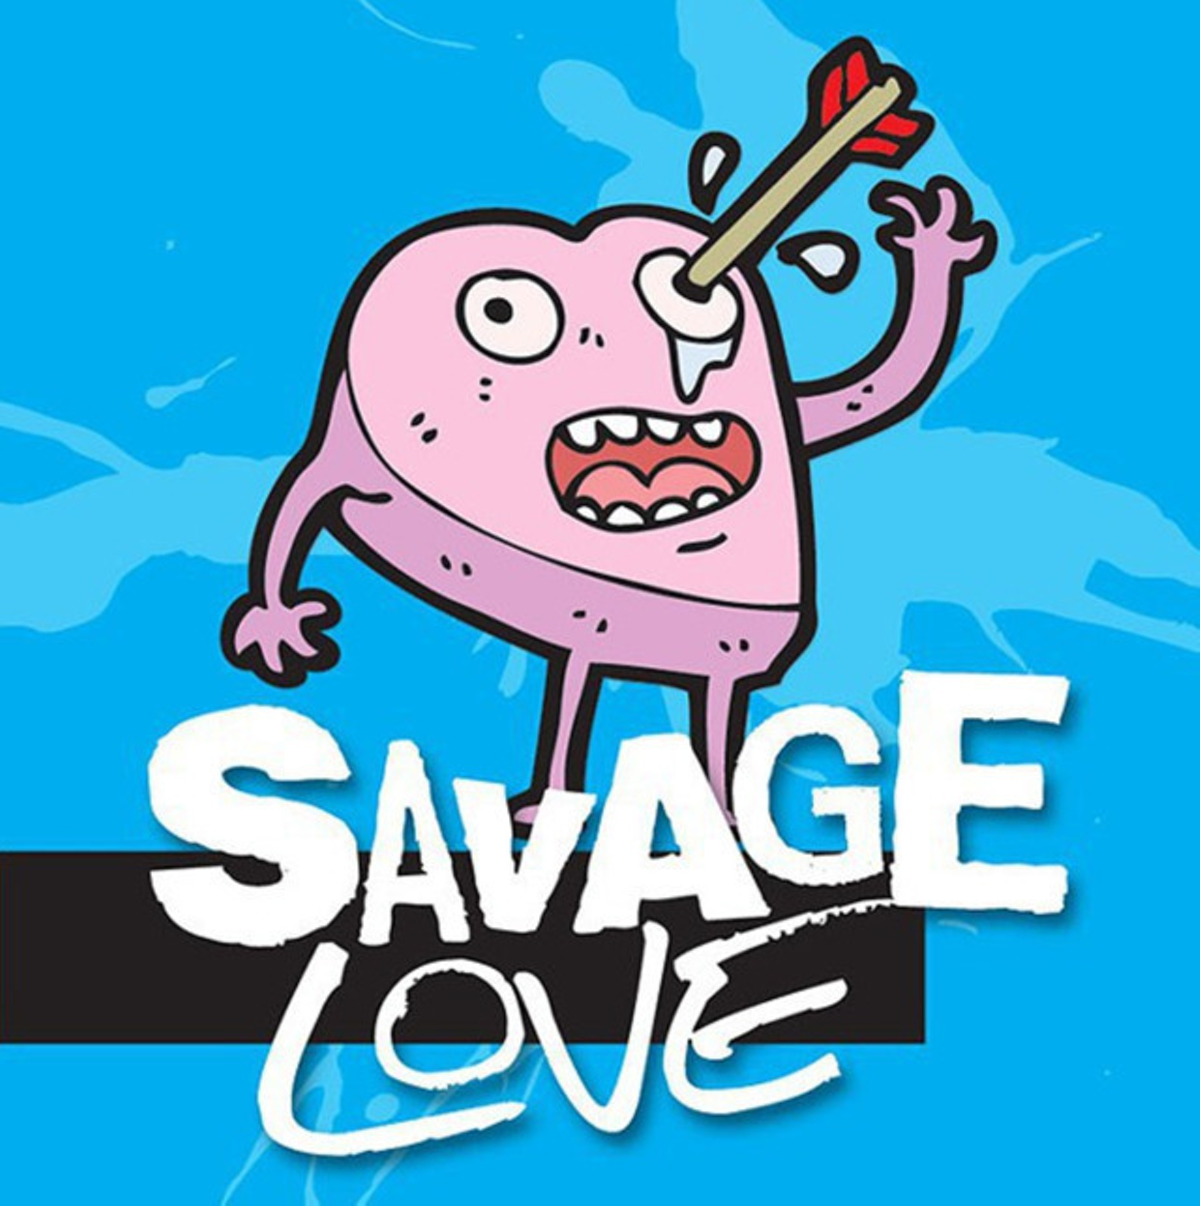 Savage Love I view bondage the same as getting together with friends for a round of golf, or shooting hoops Columns Tampa Creative Loafing Tampa picture pic